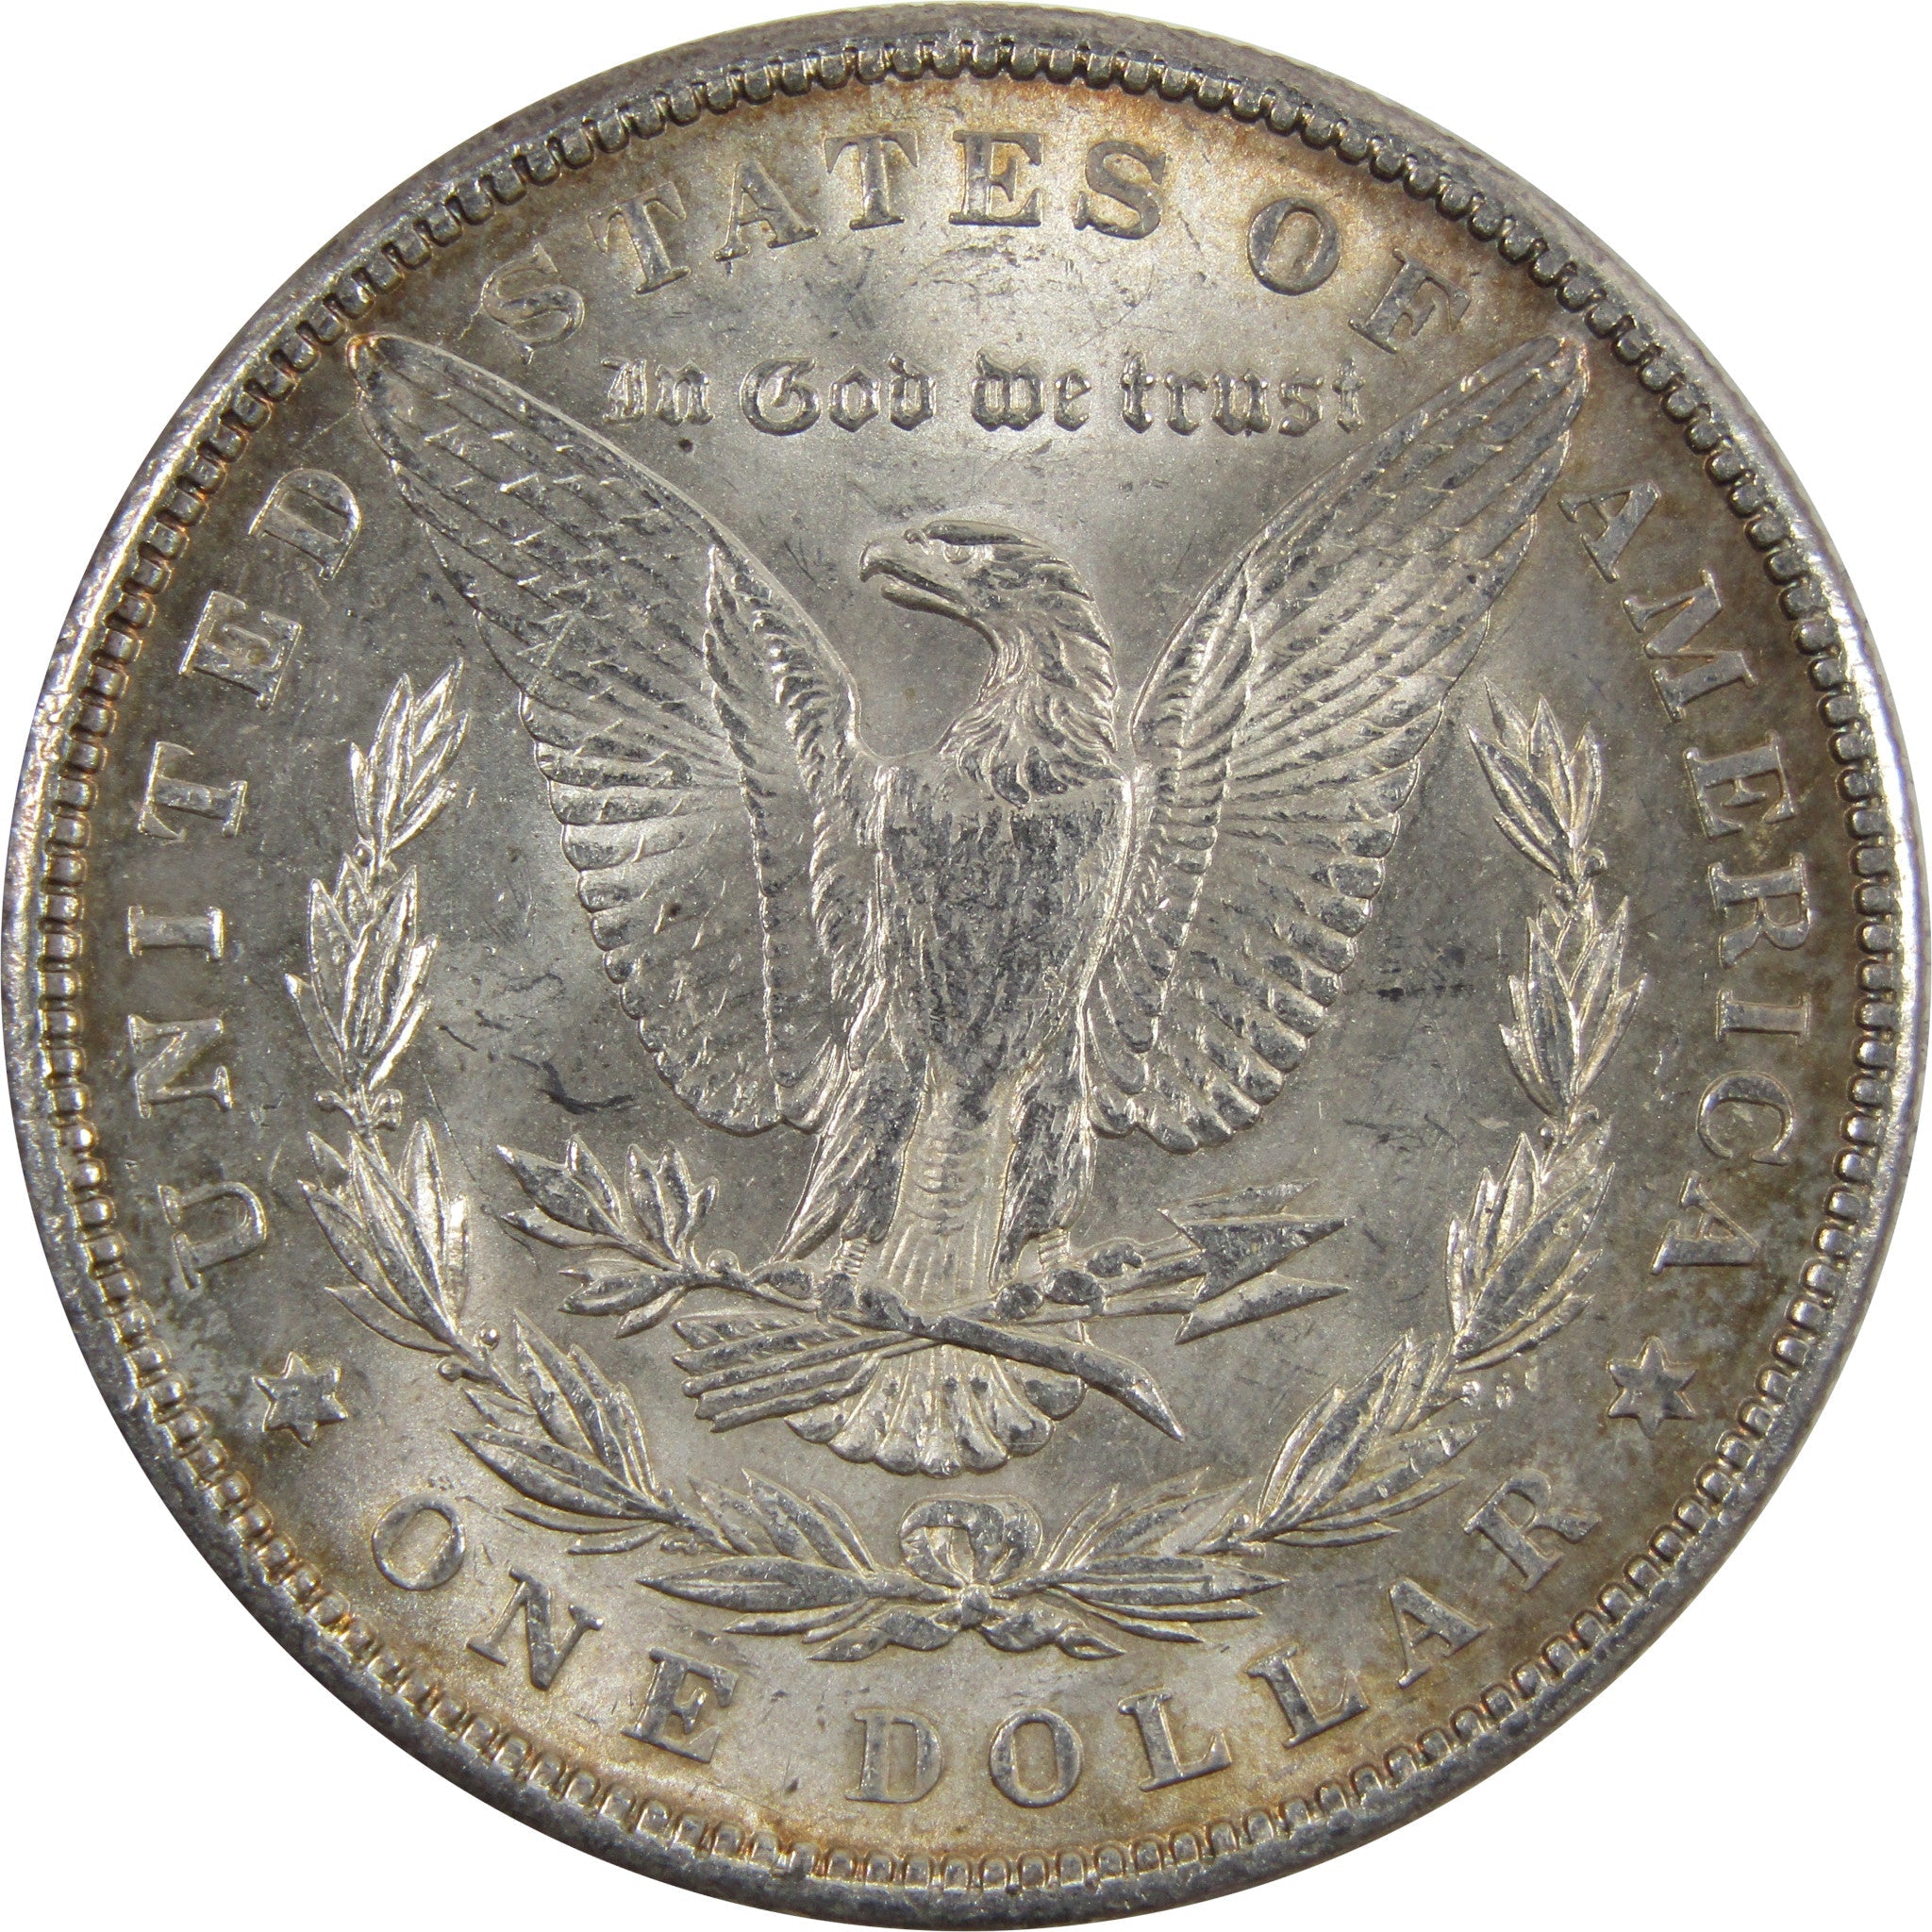 1900 Morgan Dollar AU About Uncirculated 90% Silver $1 Coin SKU:I5529 - Morgan coin - Morgan silver dollar - Morgan silver dollar for sale - Profile Coins &amp; Collectibles